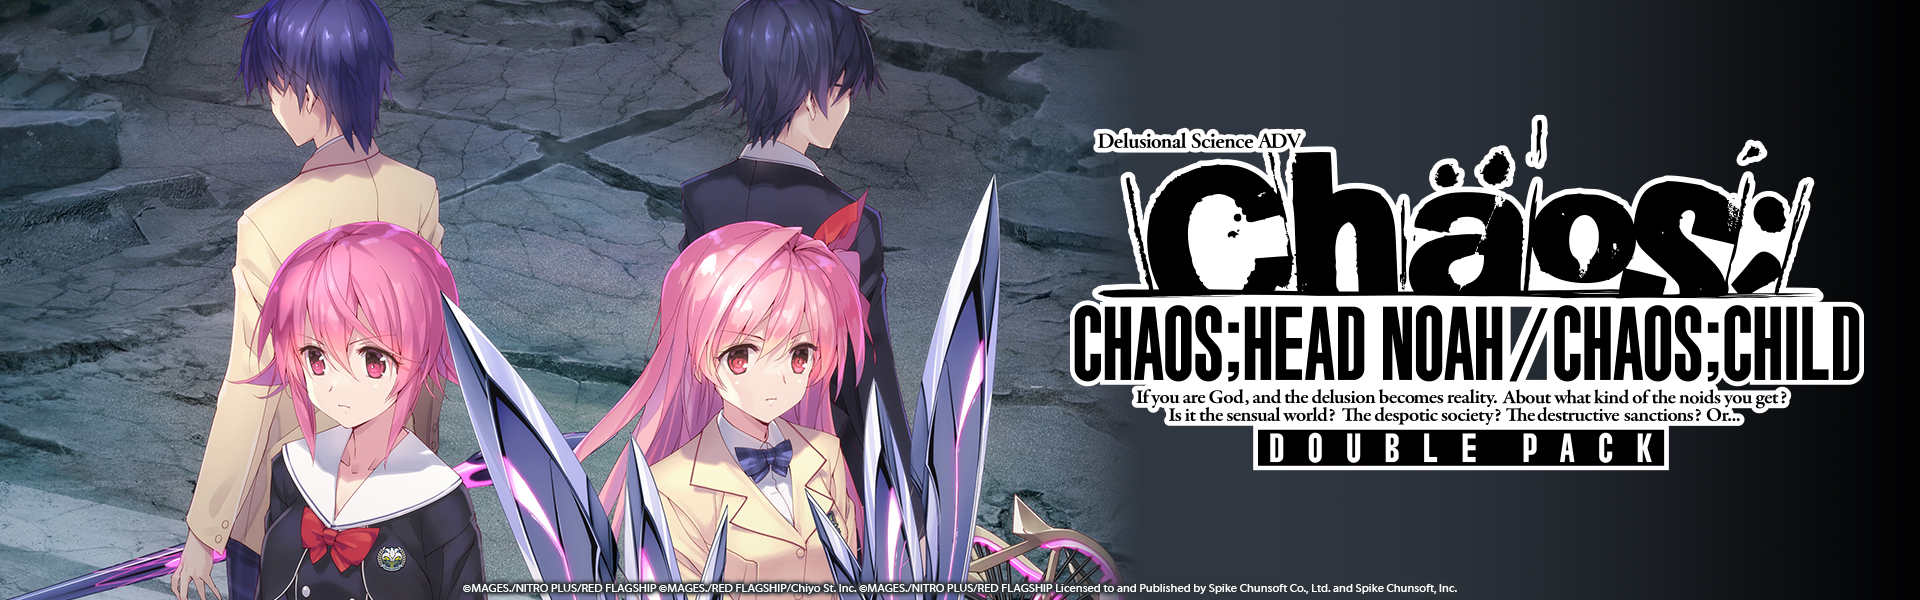 Chaos;Head Noah / Chaos;Child Double Pack For The Nintendo Switch